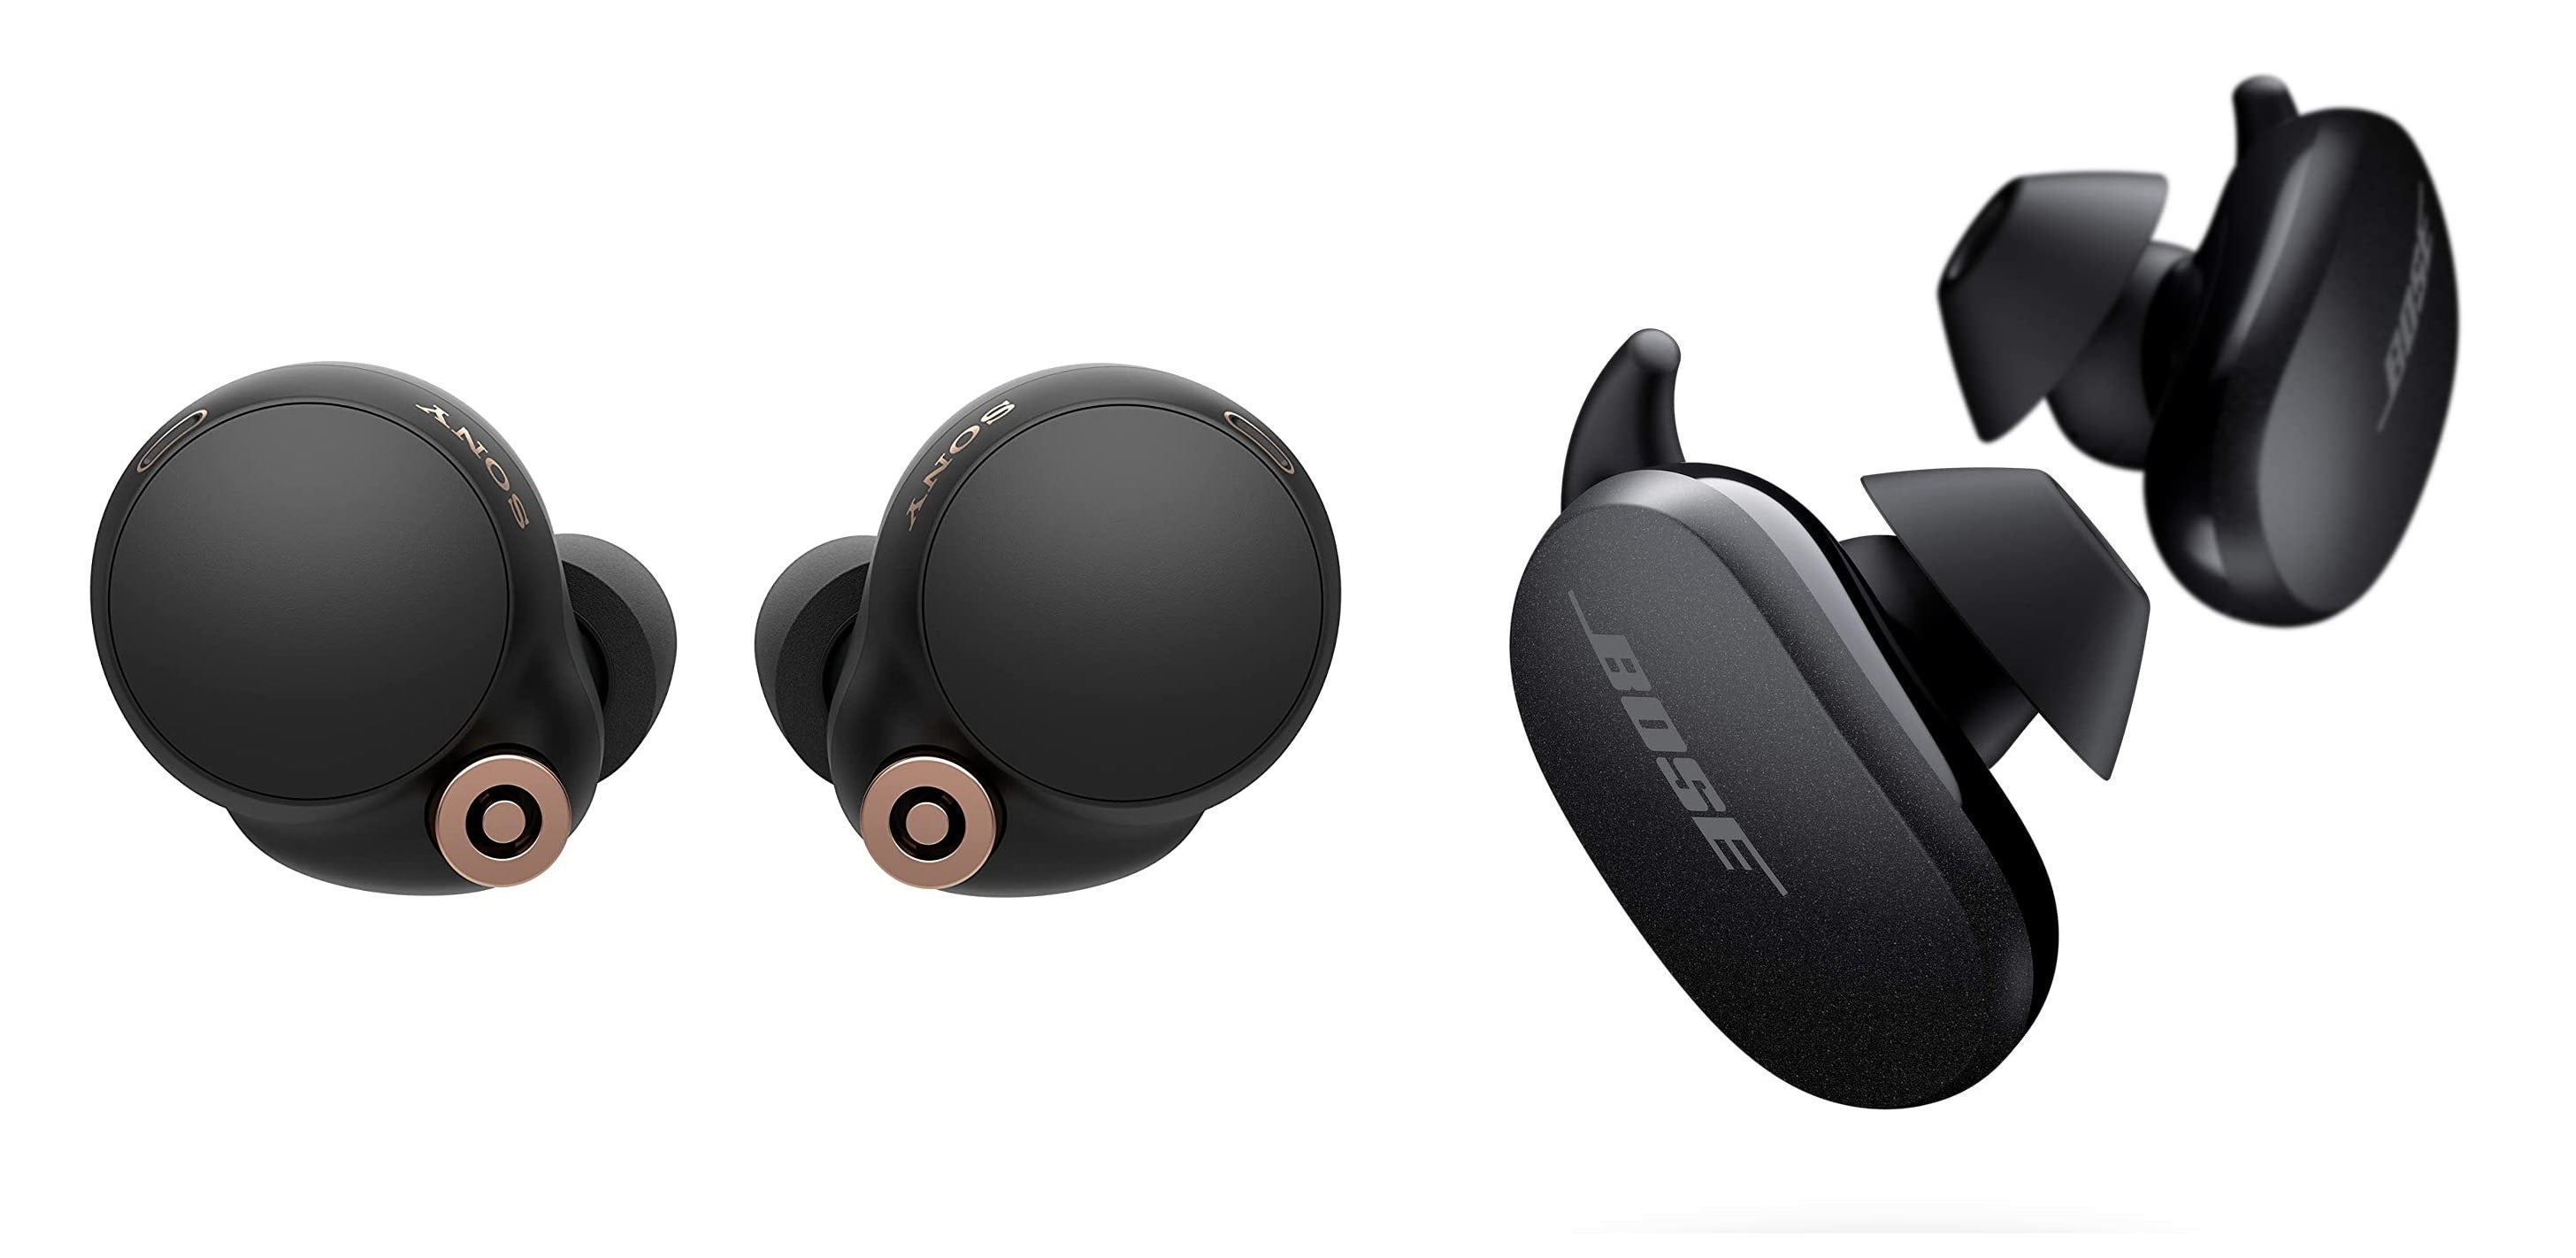 Sony WF-1000XM4 vs Bose QuietComfort Earbuds and Bose Sport Earbuds vs Beats Fit Pro: Which to buy?